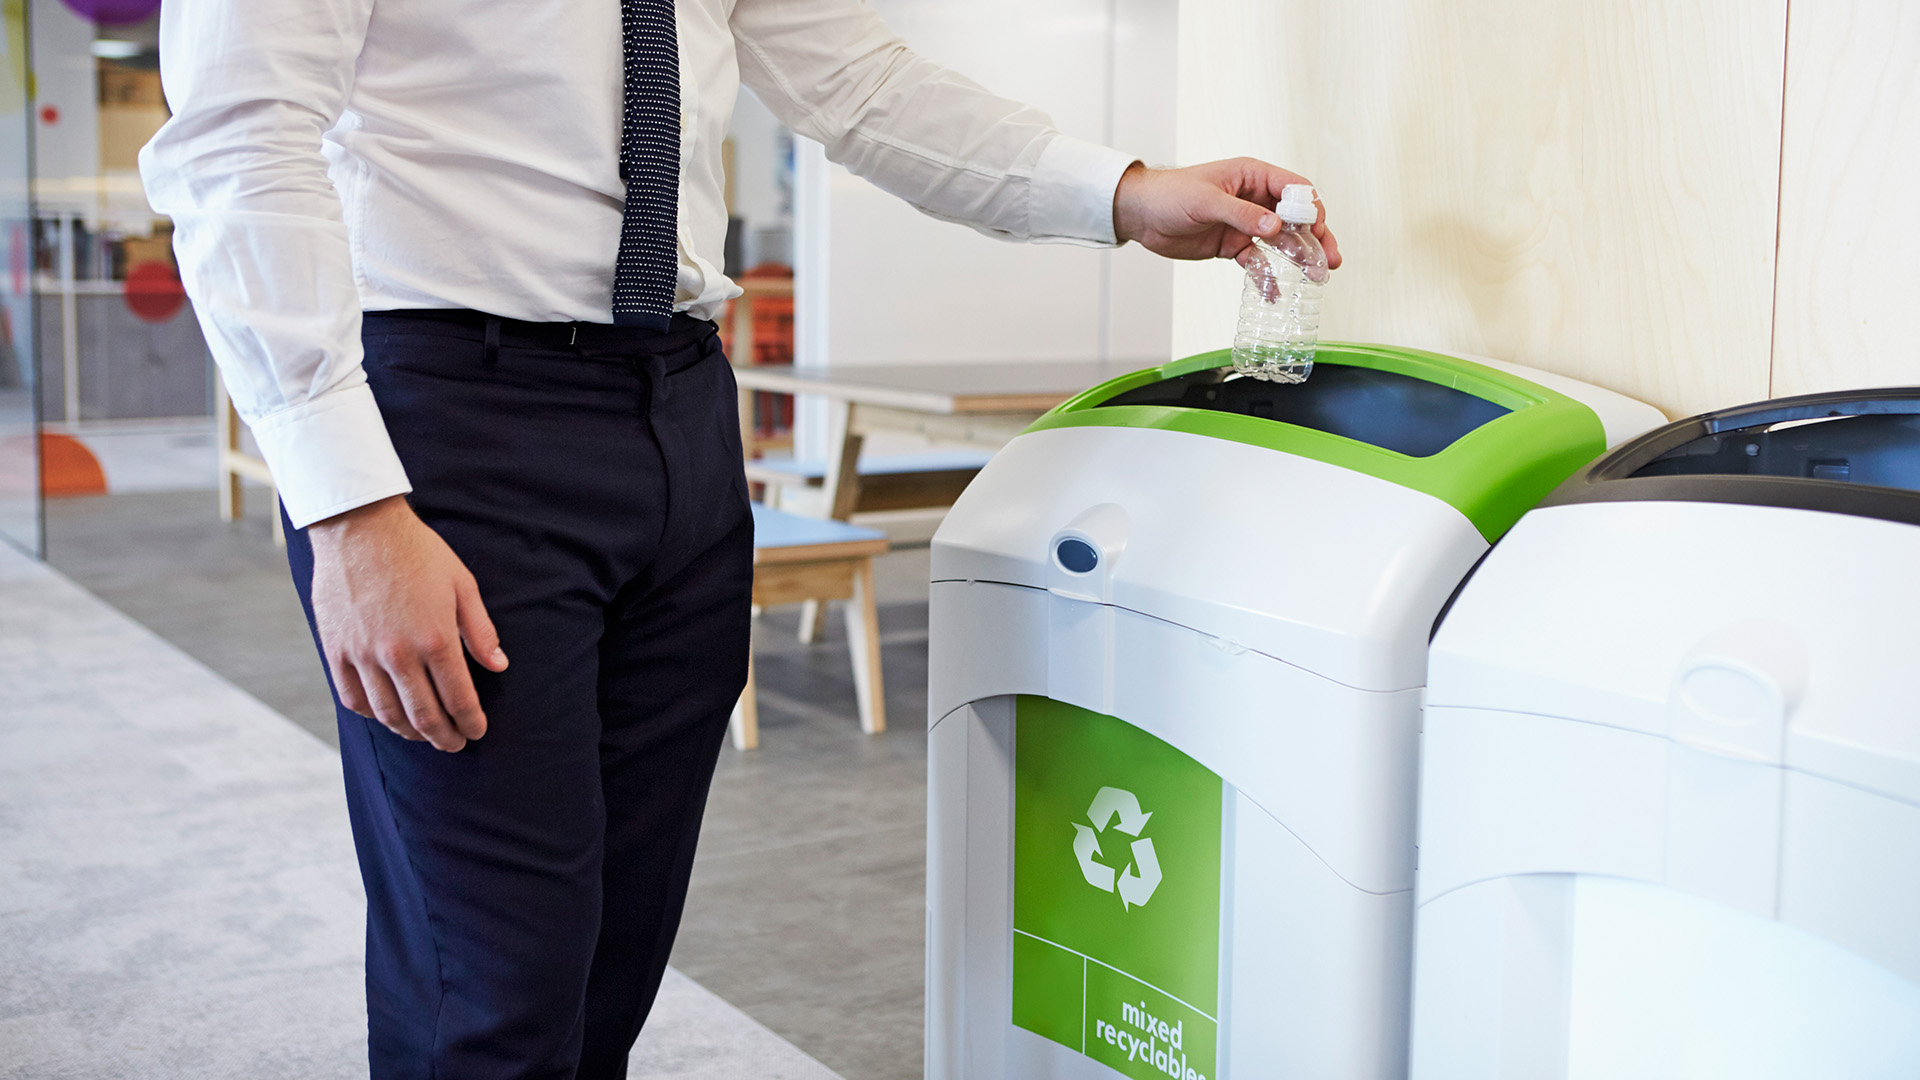 Partial view of an individual in business attire recycling waste into a green bin.